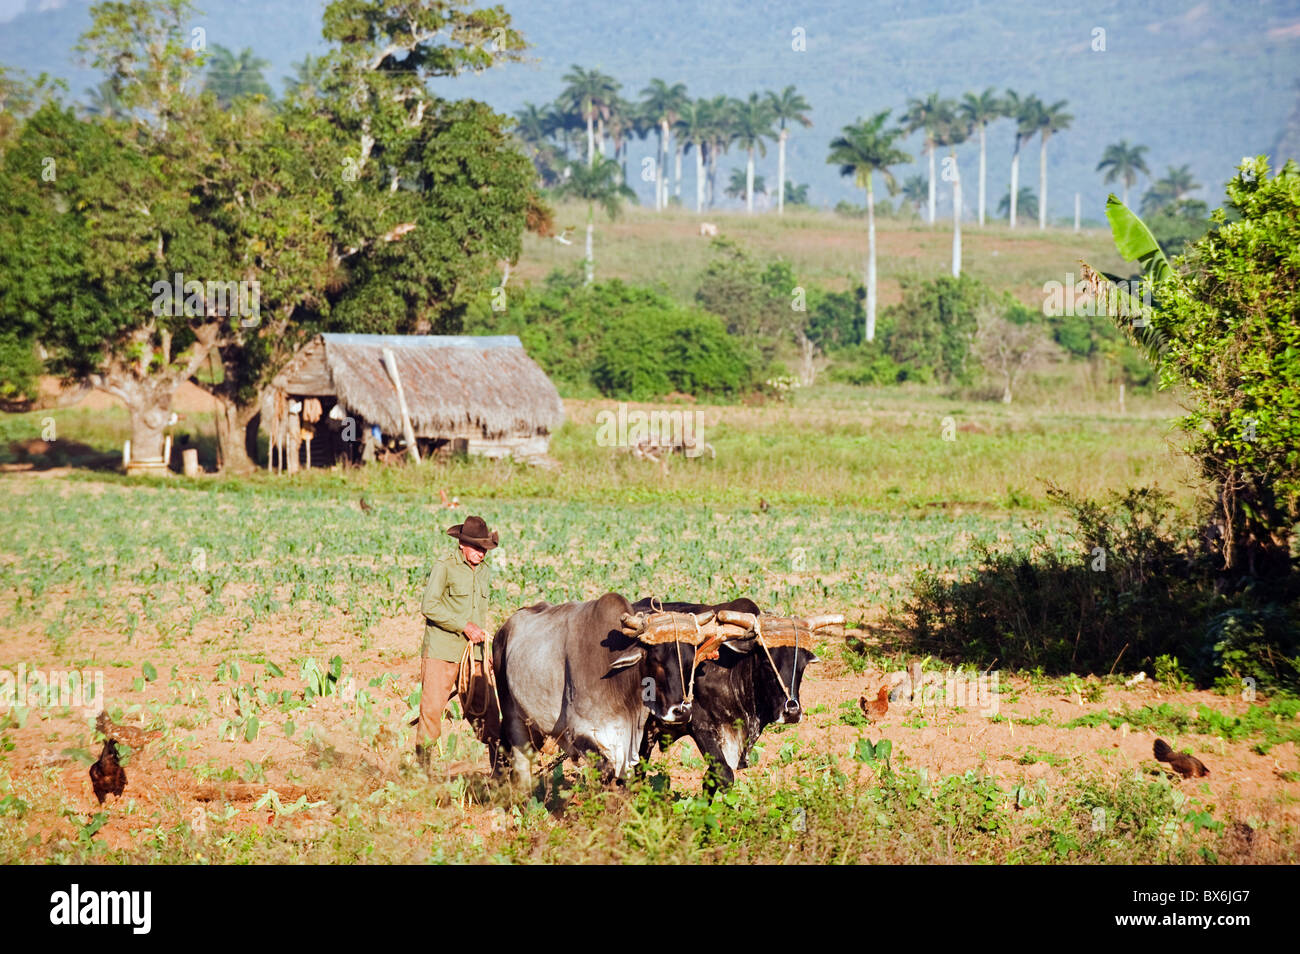 A farmer ploughing his field with oxen, UNESCO World Heritage Site, Vinales Valley, Cuba, West Indies Stock Photo